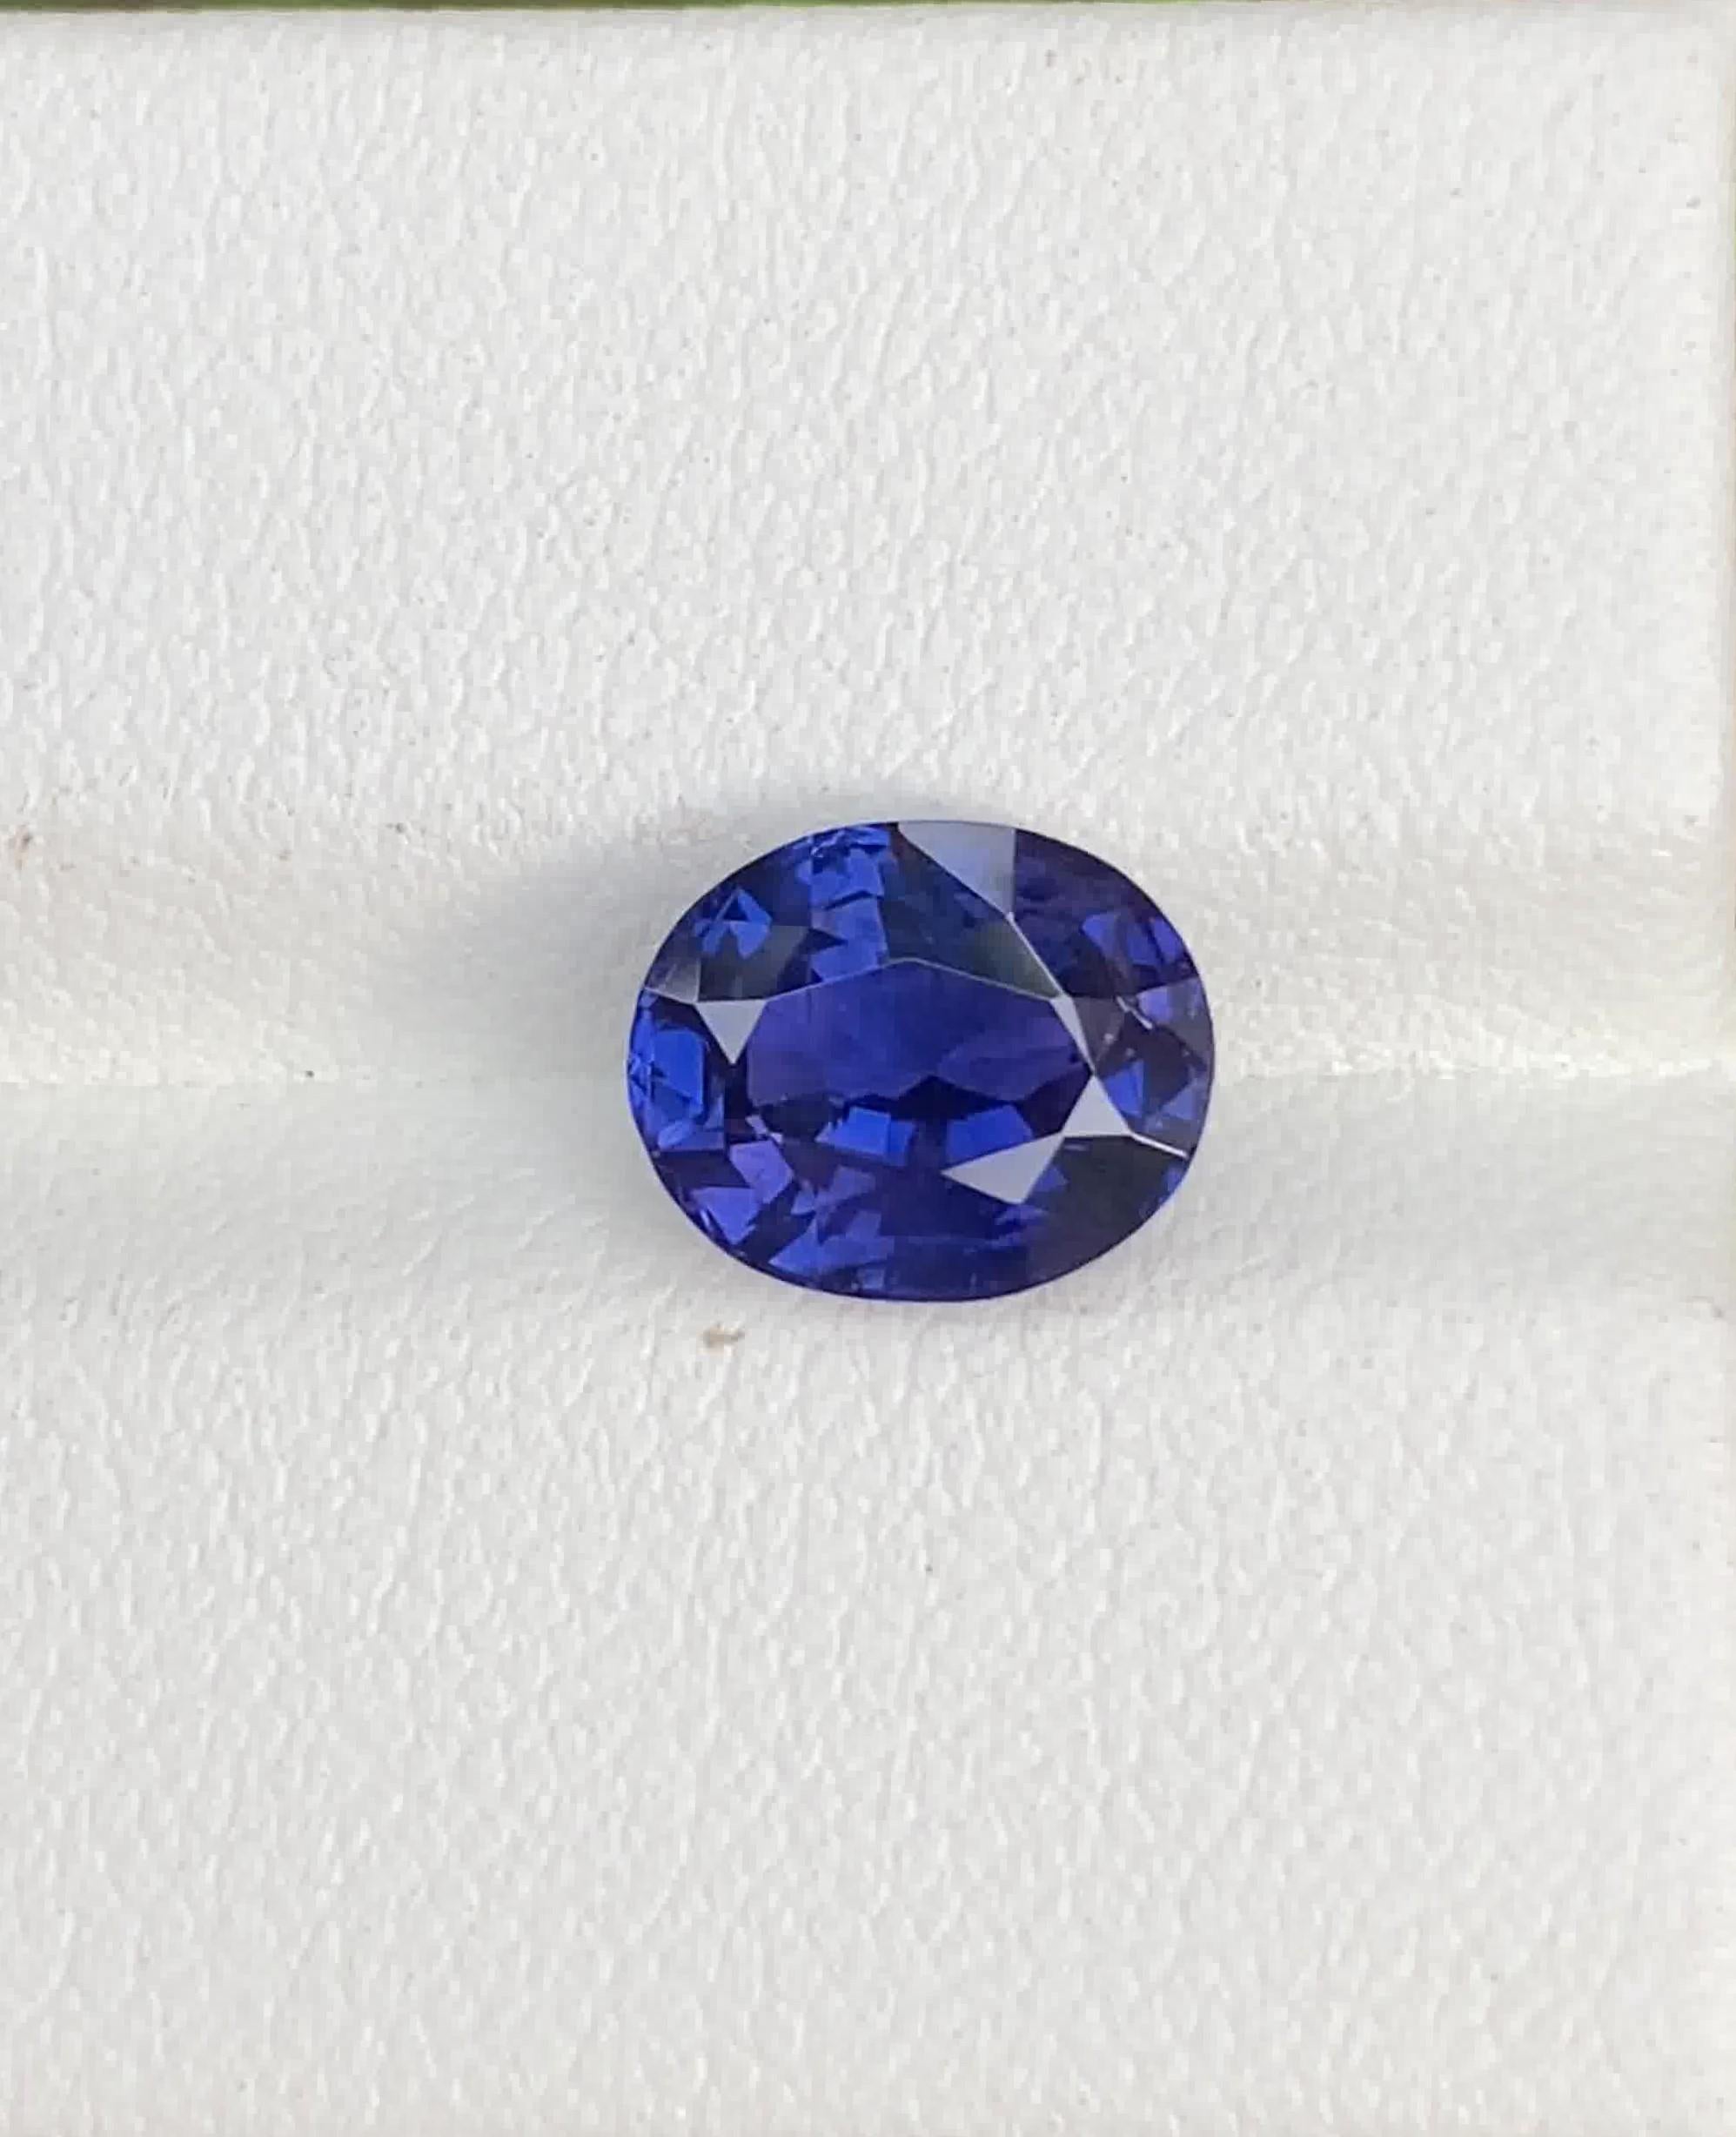 Ceylon Royal Blue sapphire 2.55 Carats unheated Gemstone with super luster. eye clean gemstone with natural inclusions perfect for a ring.

• Variety: Sapphire
• Origin: Sri Lanka (Ceylon)
• Color(s): Royal blue
• Shape/Cutting Style: Oval
• Cut: